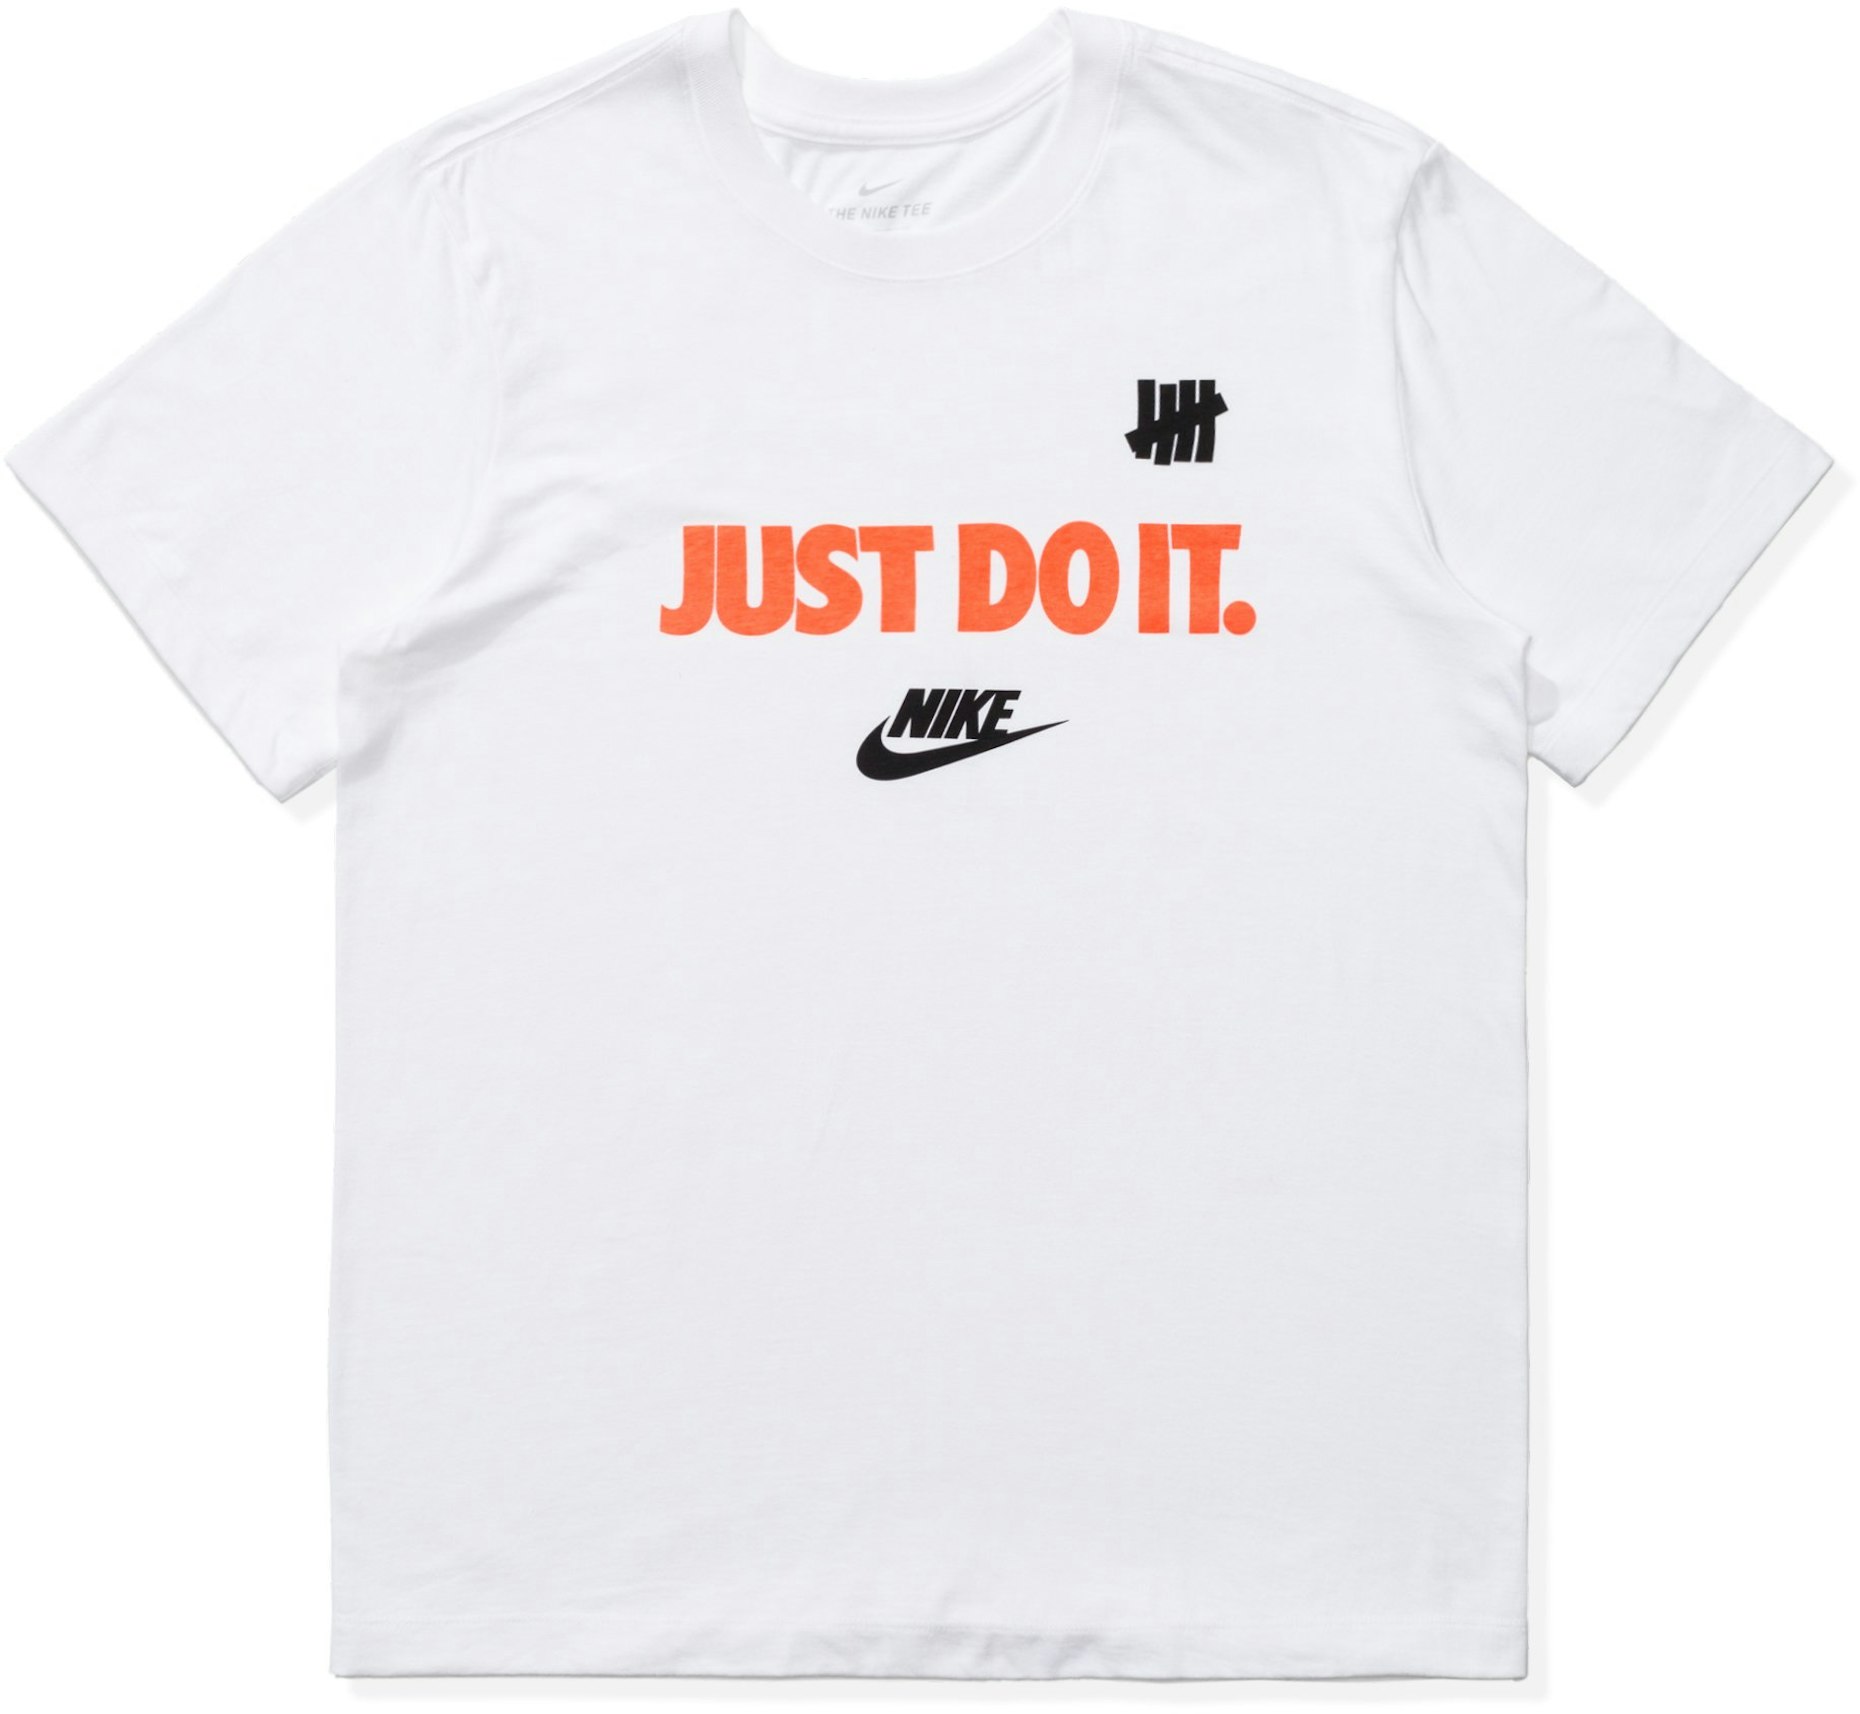 Nike x Undefeated Just It Tee - FW19 - US